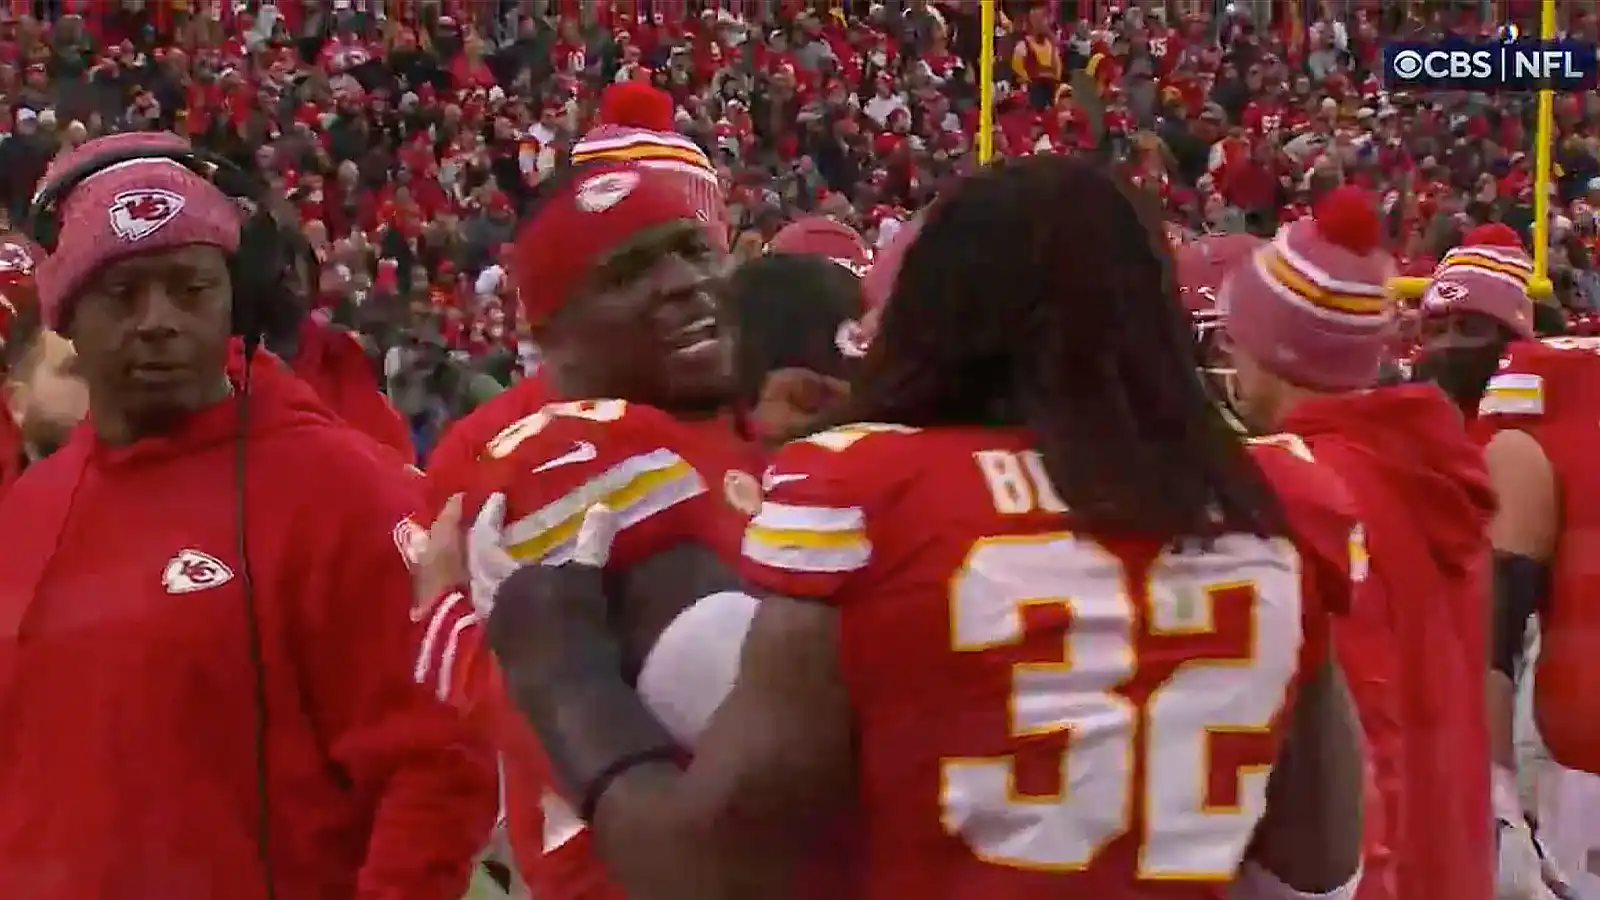 Kansas City Chiefs linebacker nearly comes to blows with teammate on sideline